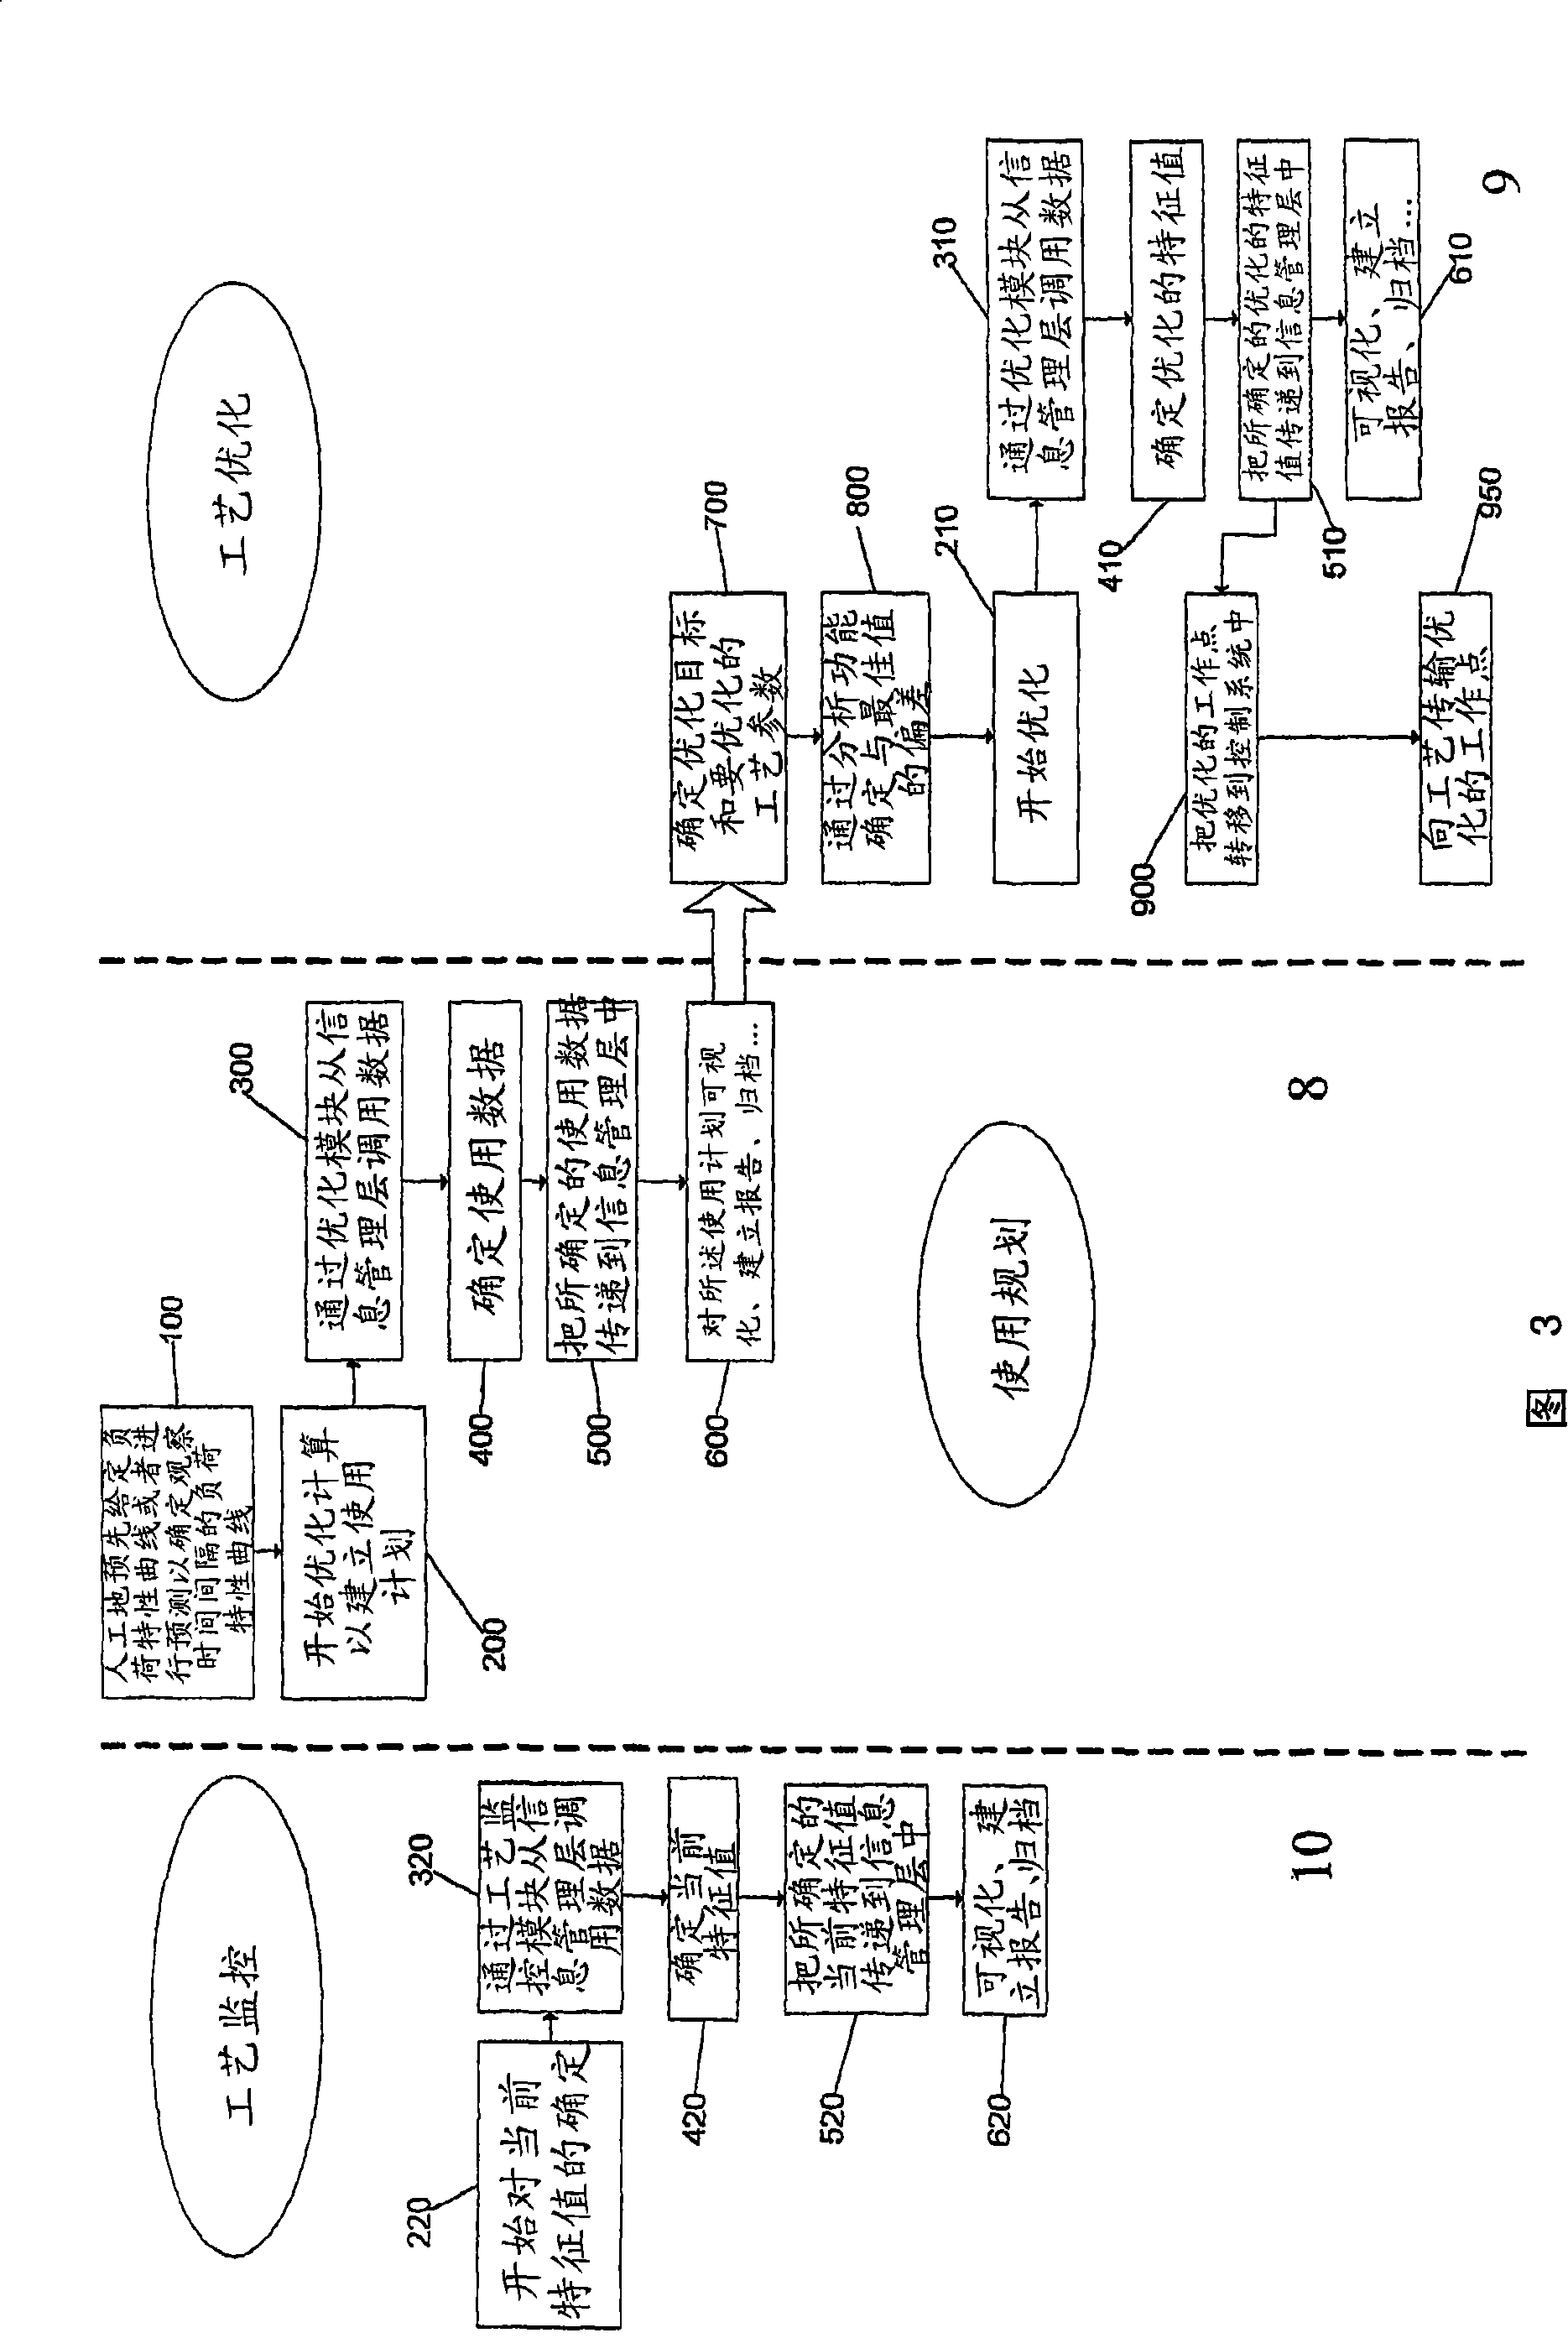 System and method for planning the operation of, monitoring processes in, simulating, and optimizing a combined power generation and water desalination plant